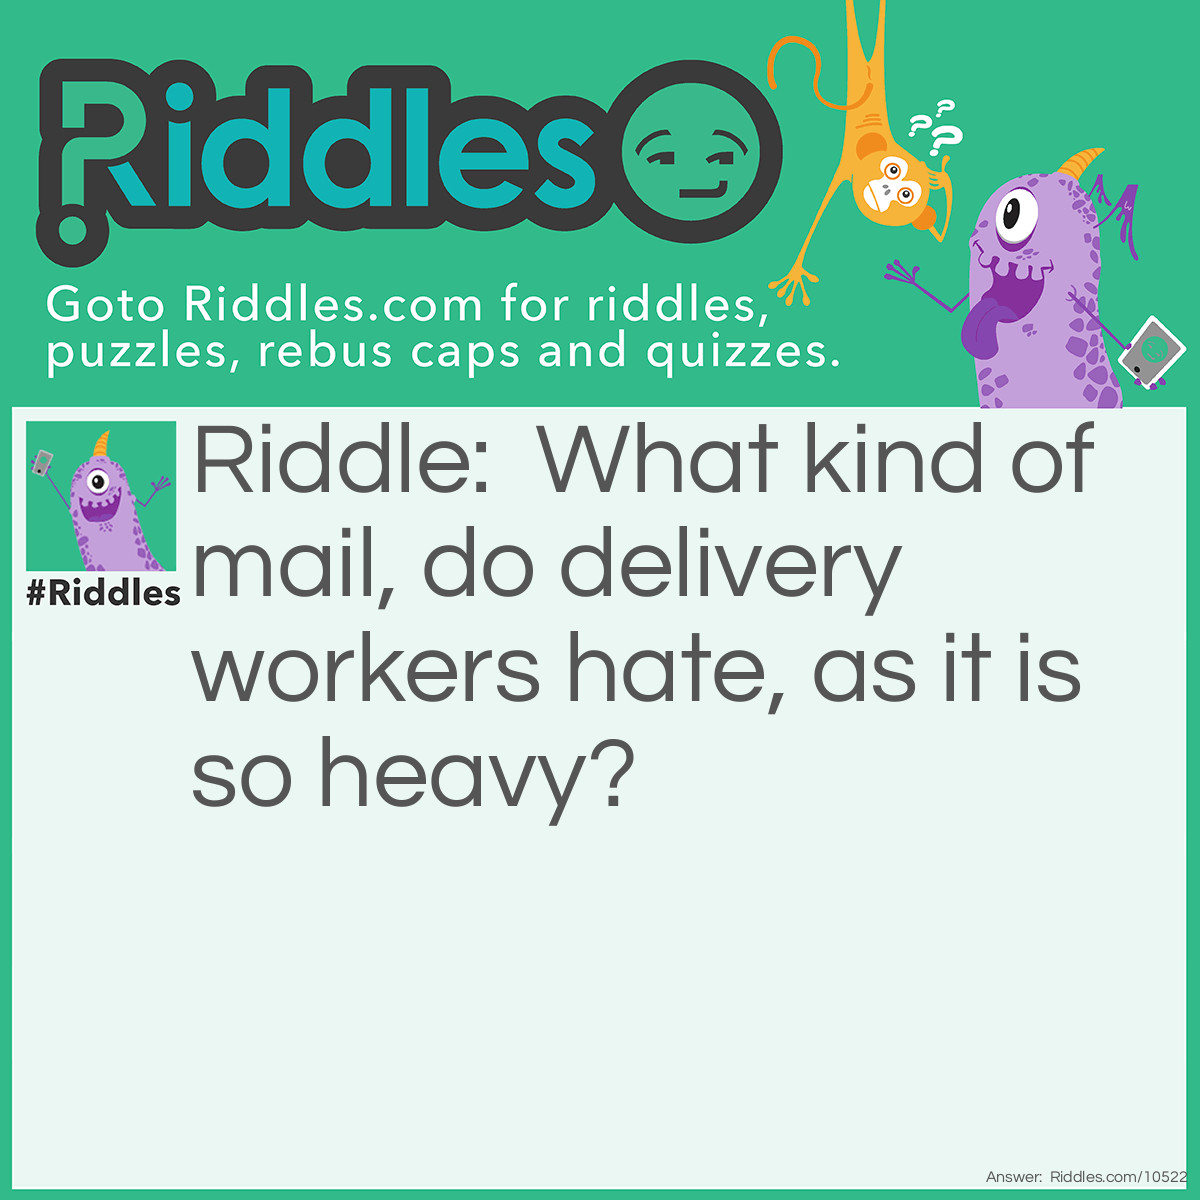 Riddle: What kind of mail, do delivery workers hate, as it is so heavy? Answer: Chain Mail.